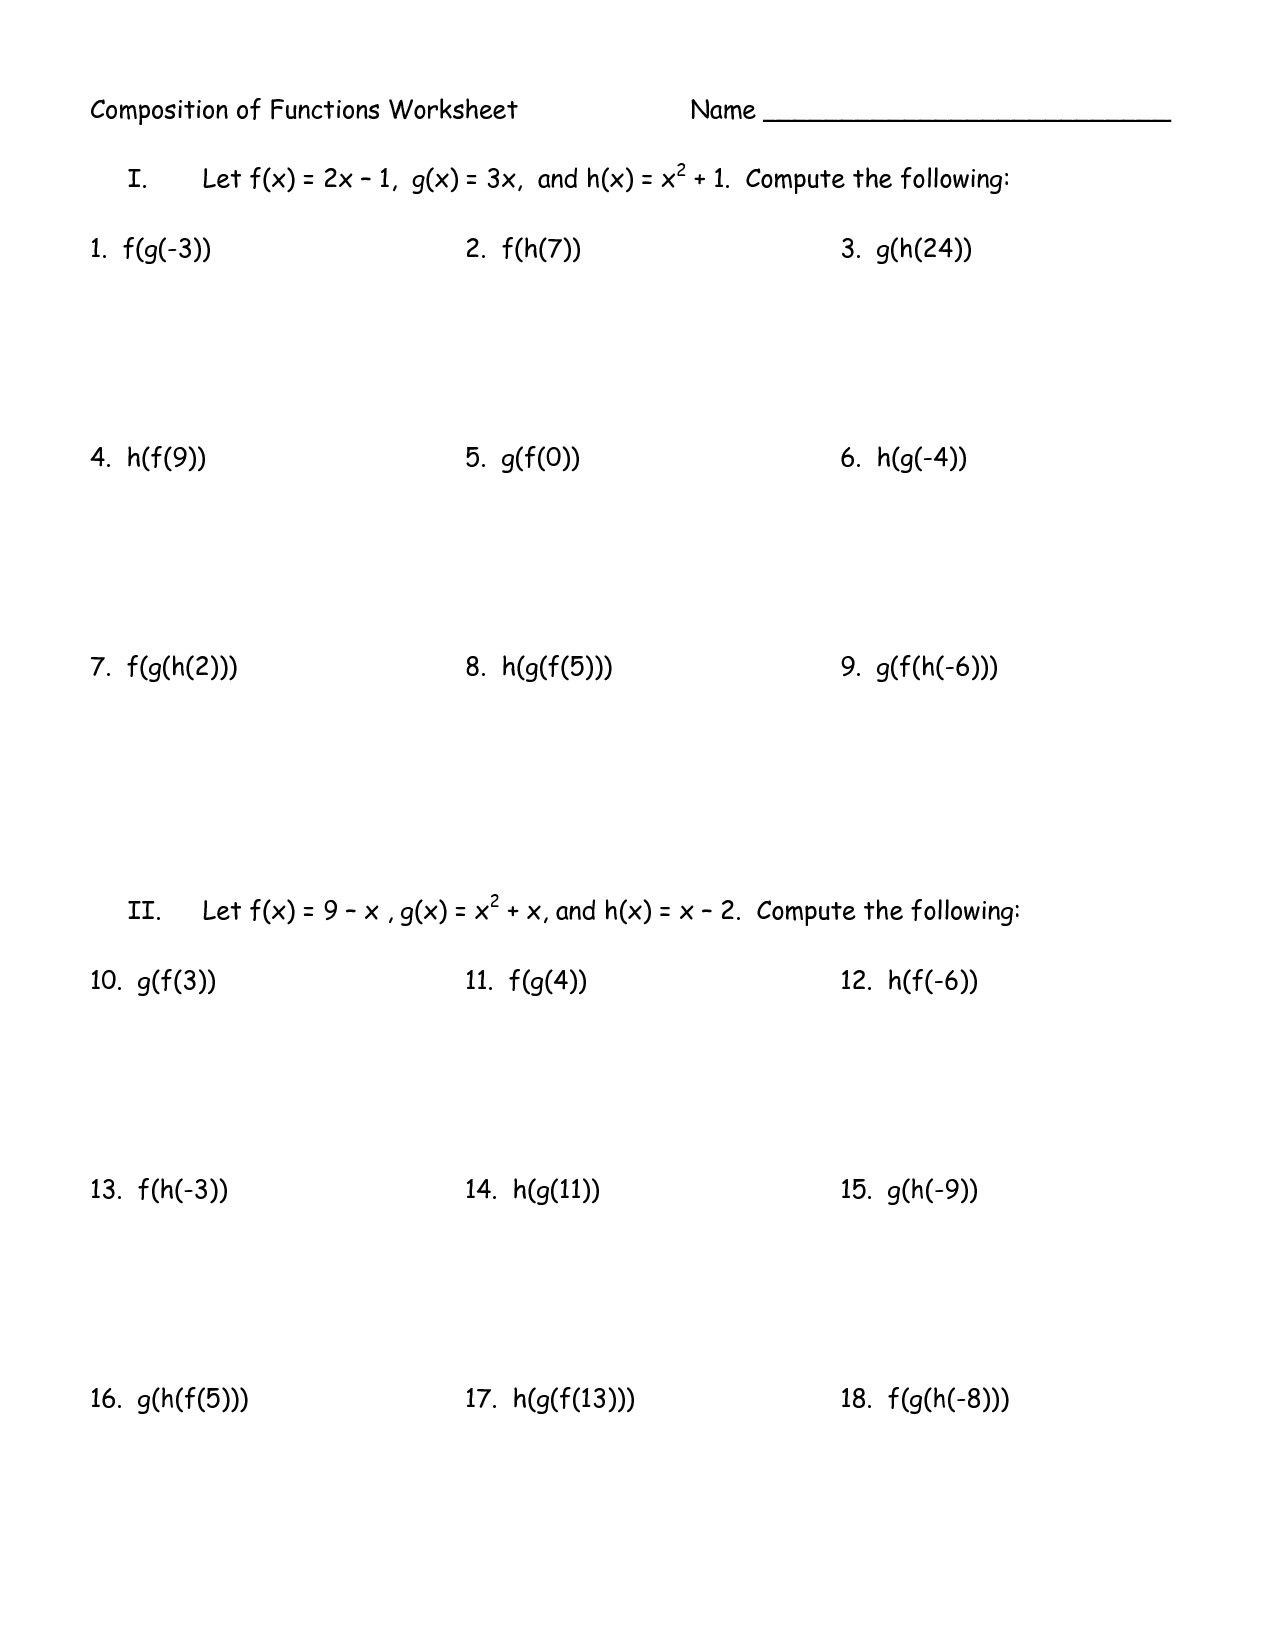 Significant Figures Worksheet Answers 5 Academic Periodic Table Worksheet Answers Chemistry if8766